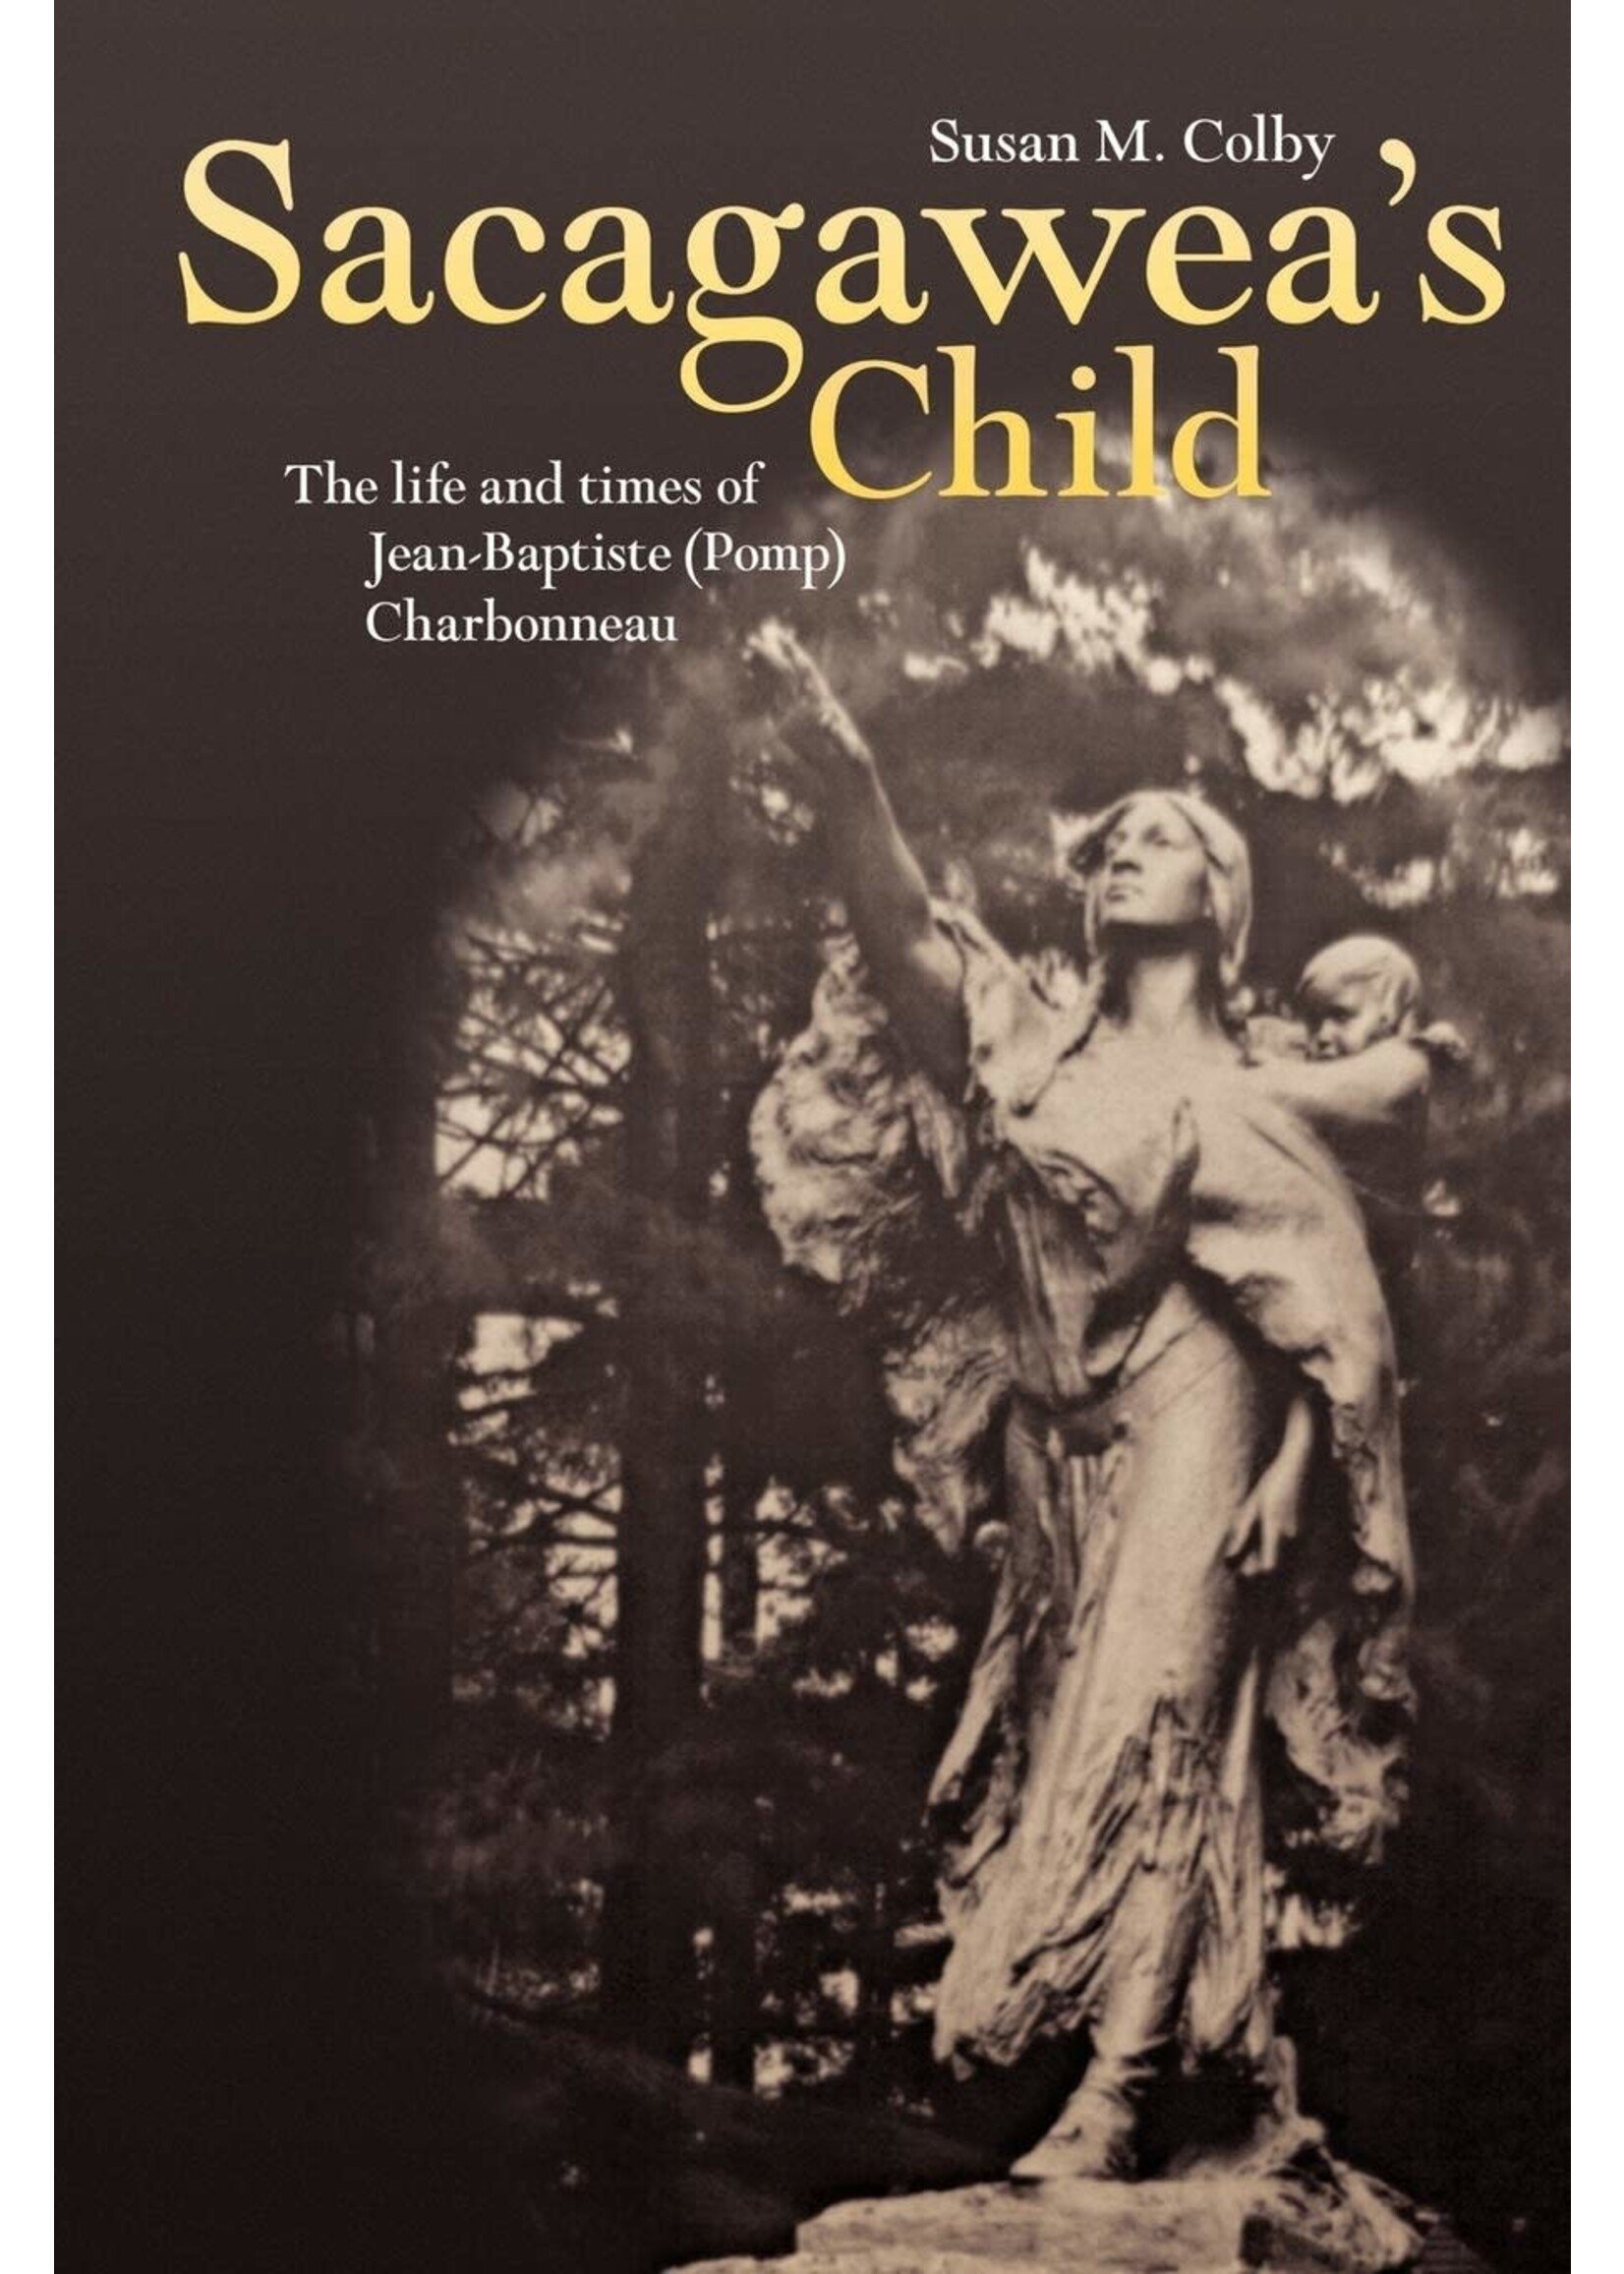 Sacagawea's Child: The Life and Times of Jean-Baptiste (Pomp) Charbonneau Paperback